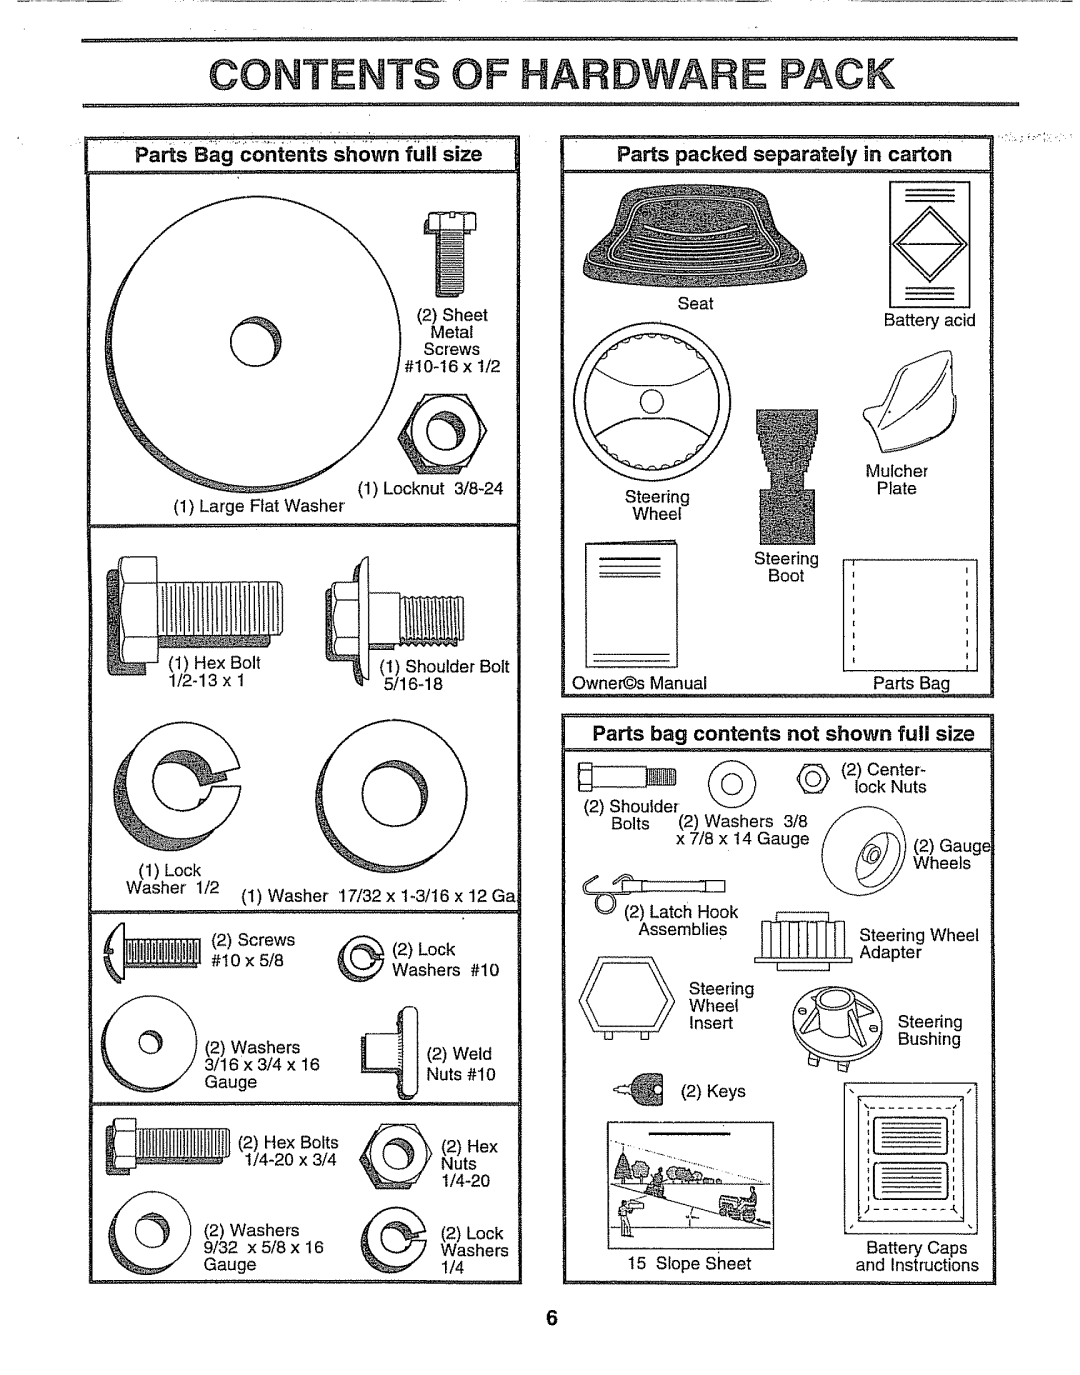 Sears 917.257552 Contents Of Hardware Pack, Parts packed separately in carton, Parts Bag contents shown full size, 2Center 